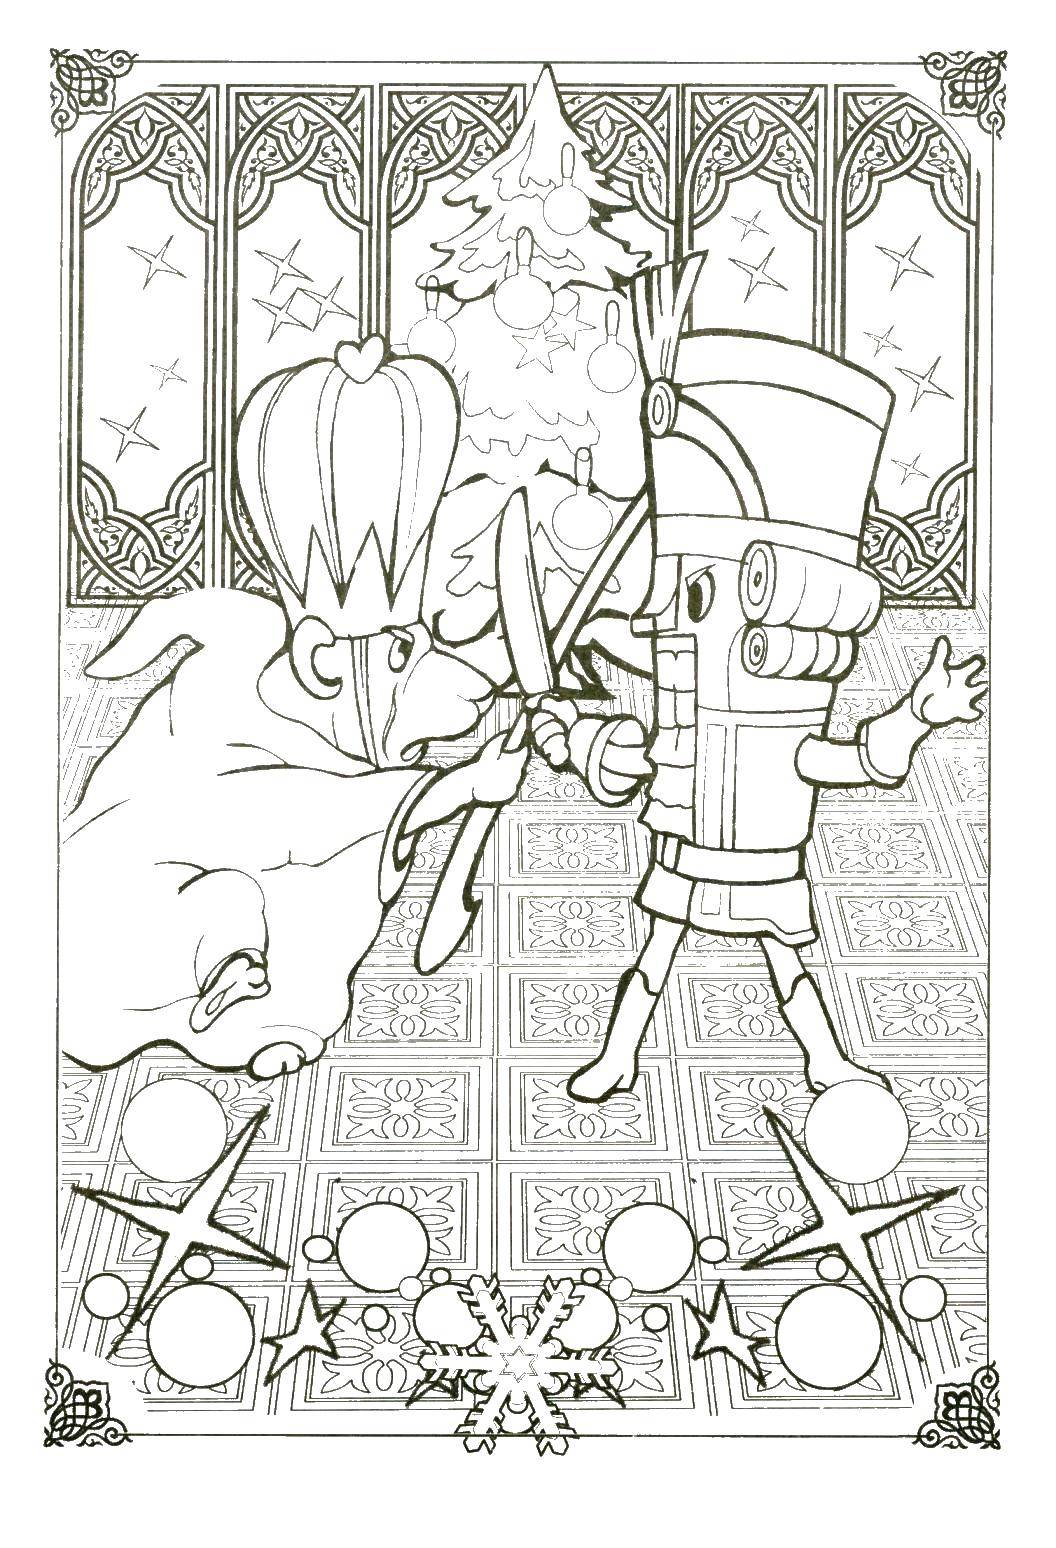 Coloring The mouse king and the Nutcracker. Category the Nutcracker. Tags:  mouse king, Nutcracker, swords.